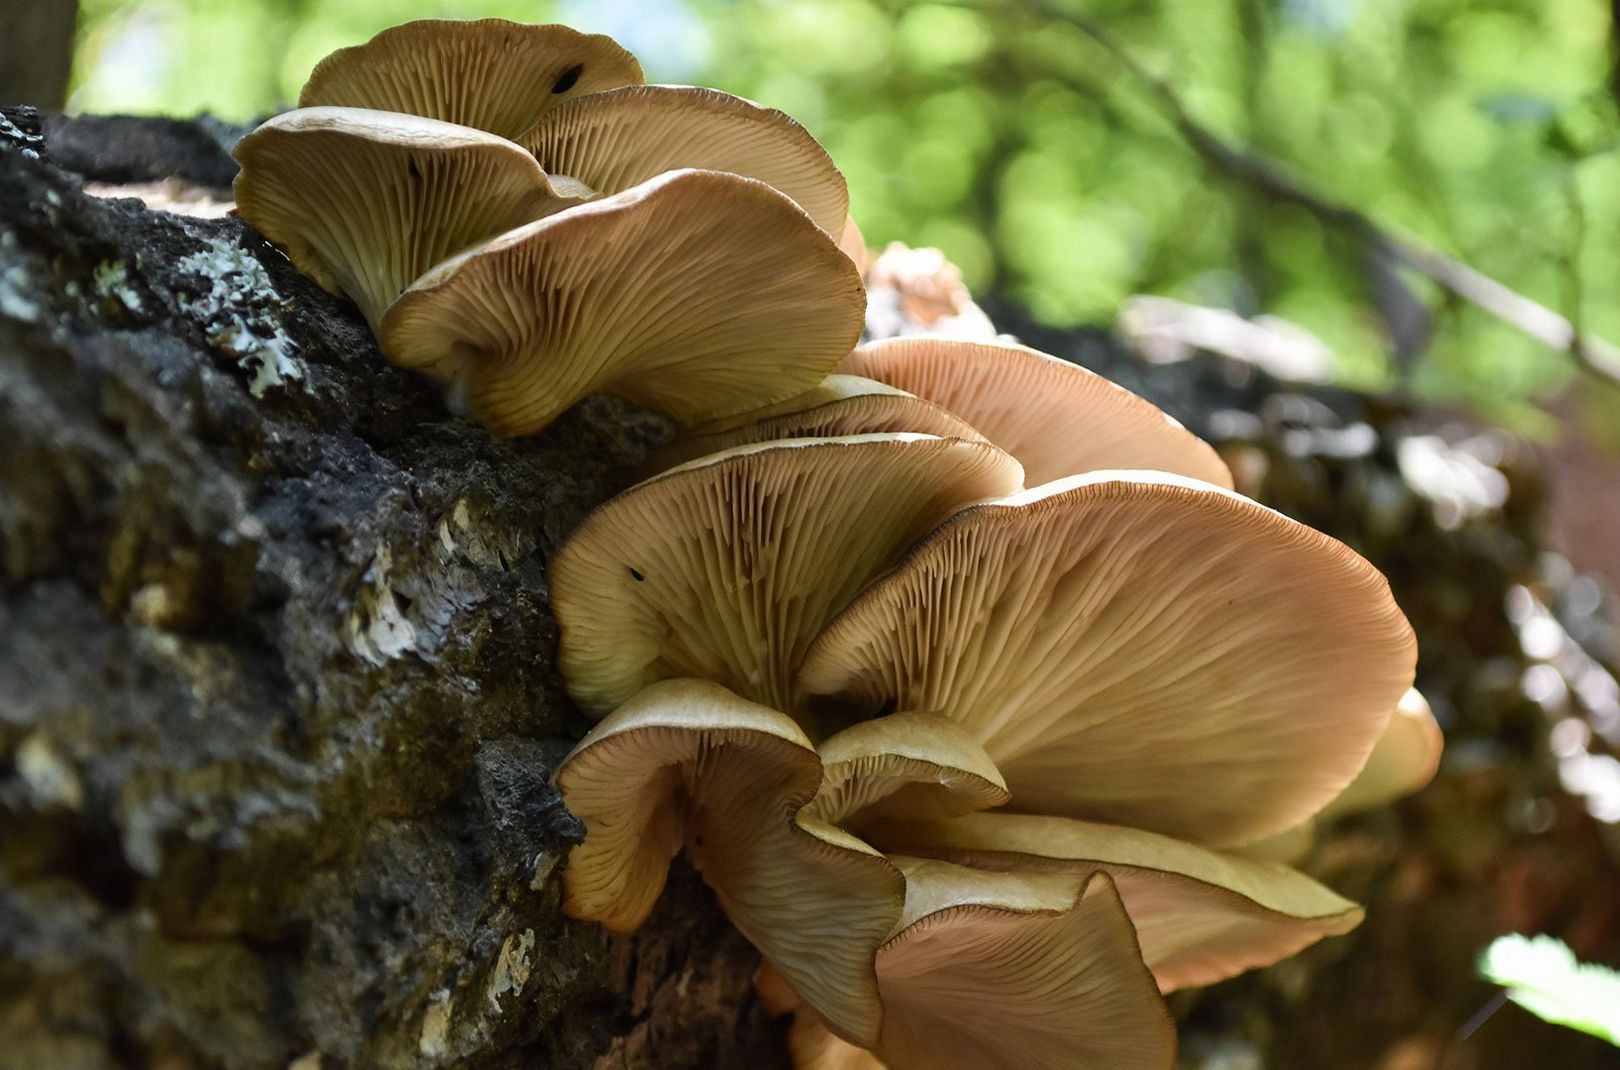 Oyster mushrooms growing on a birch tree